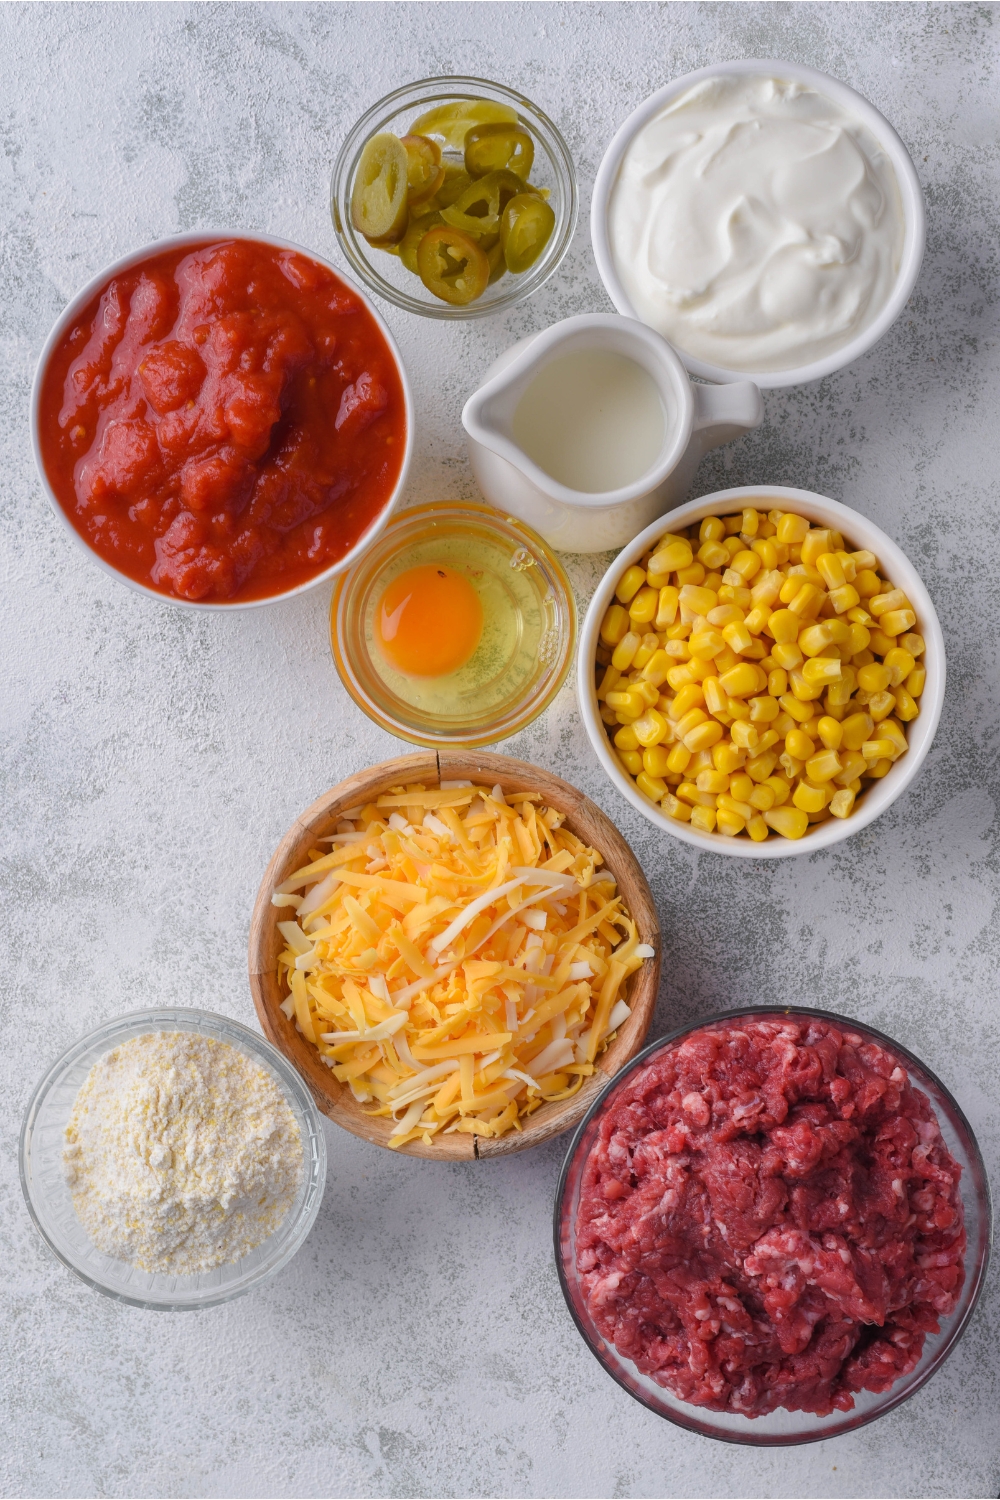 Overhead view of an assortment of ingredients including bowls of sour cream, an egg, cornbread mix, crushed tomatoes, corn, raw ground beef, and shredded cheese.